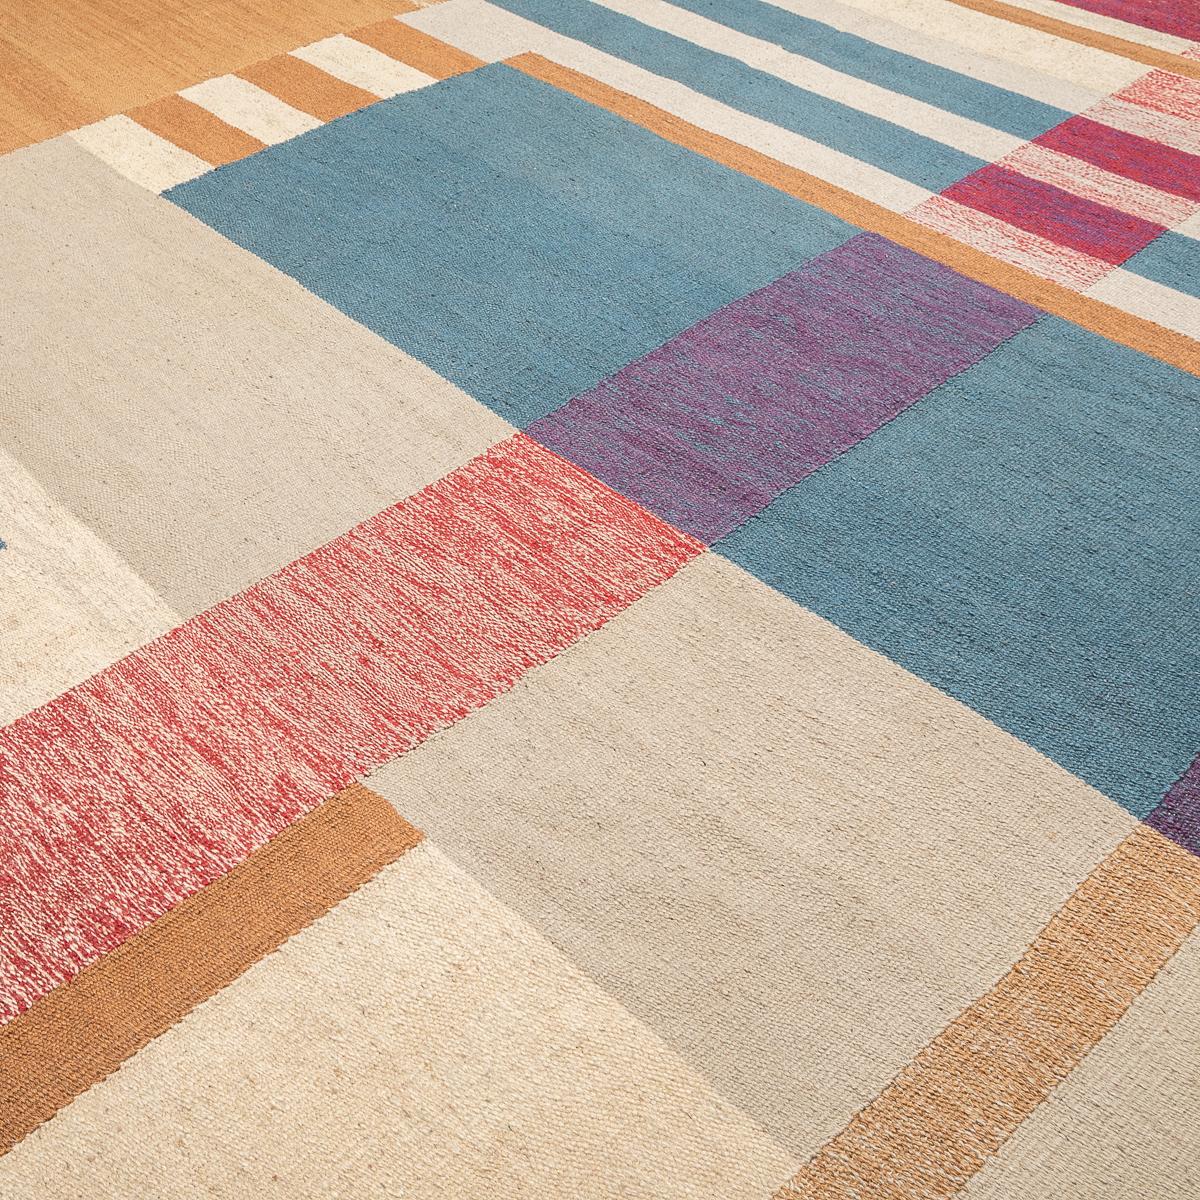 Wool Contemporary Kilim Handmade with an Original Design on Several Colors